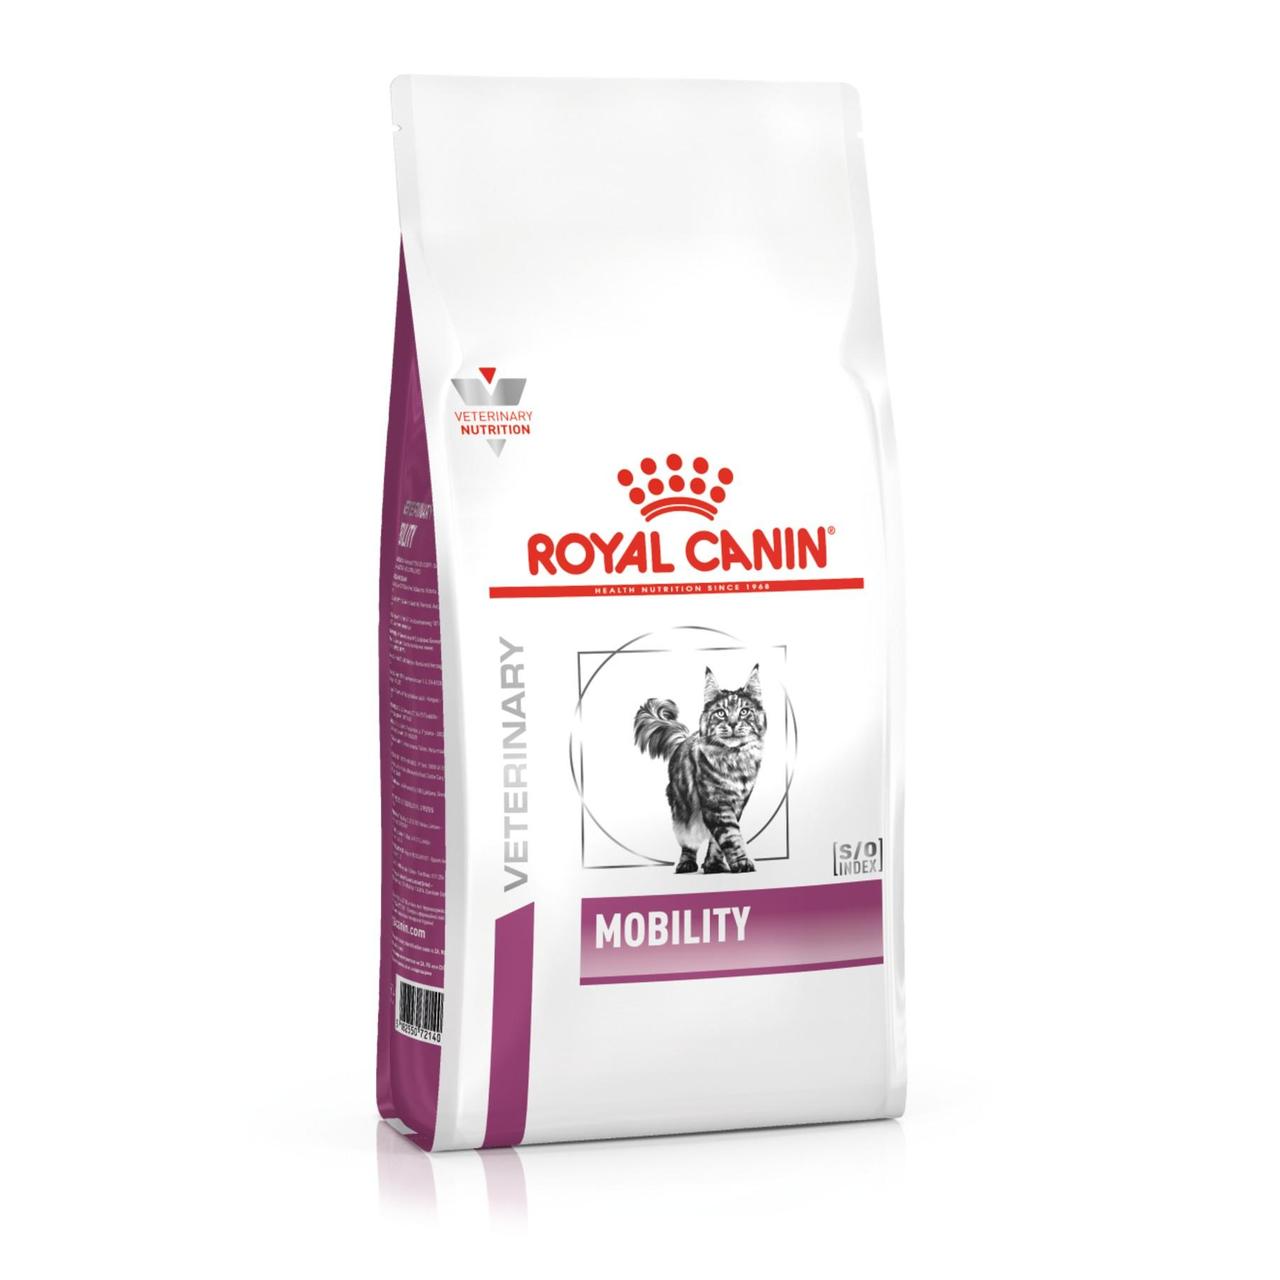 An image of Royal Canin Feline Mobility